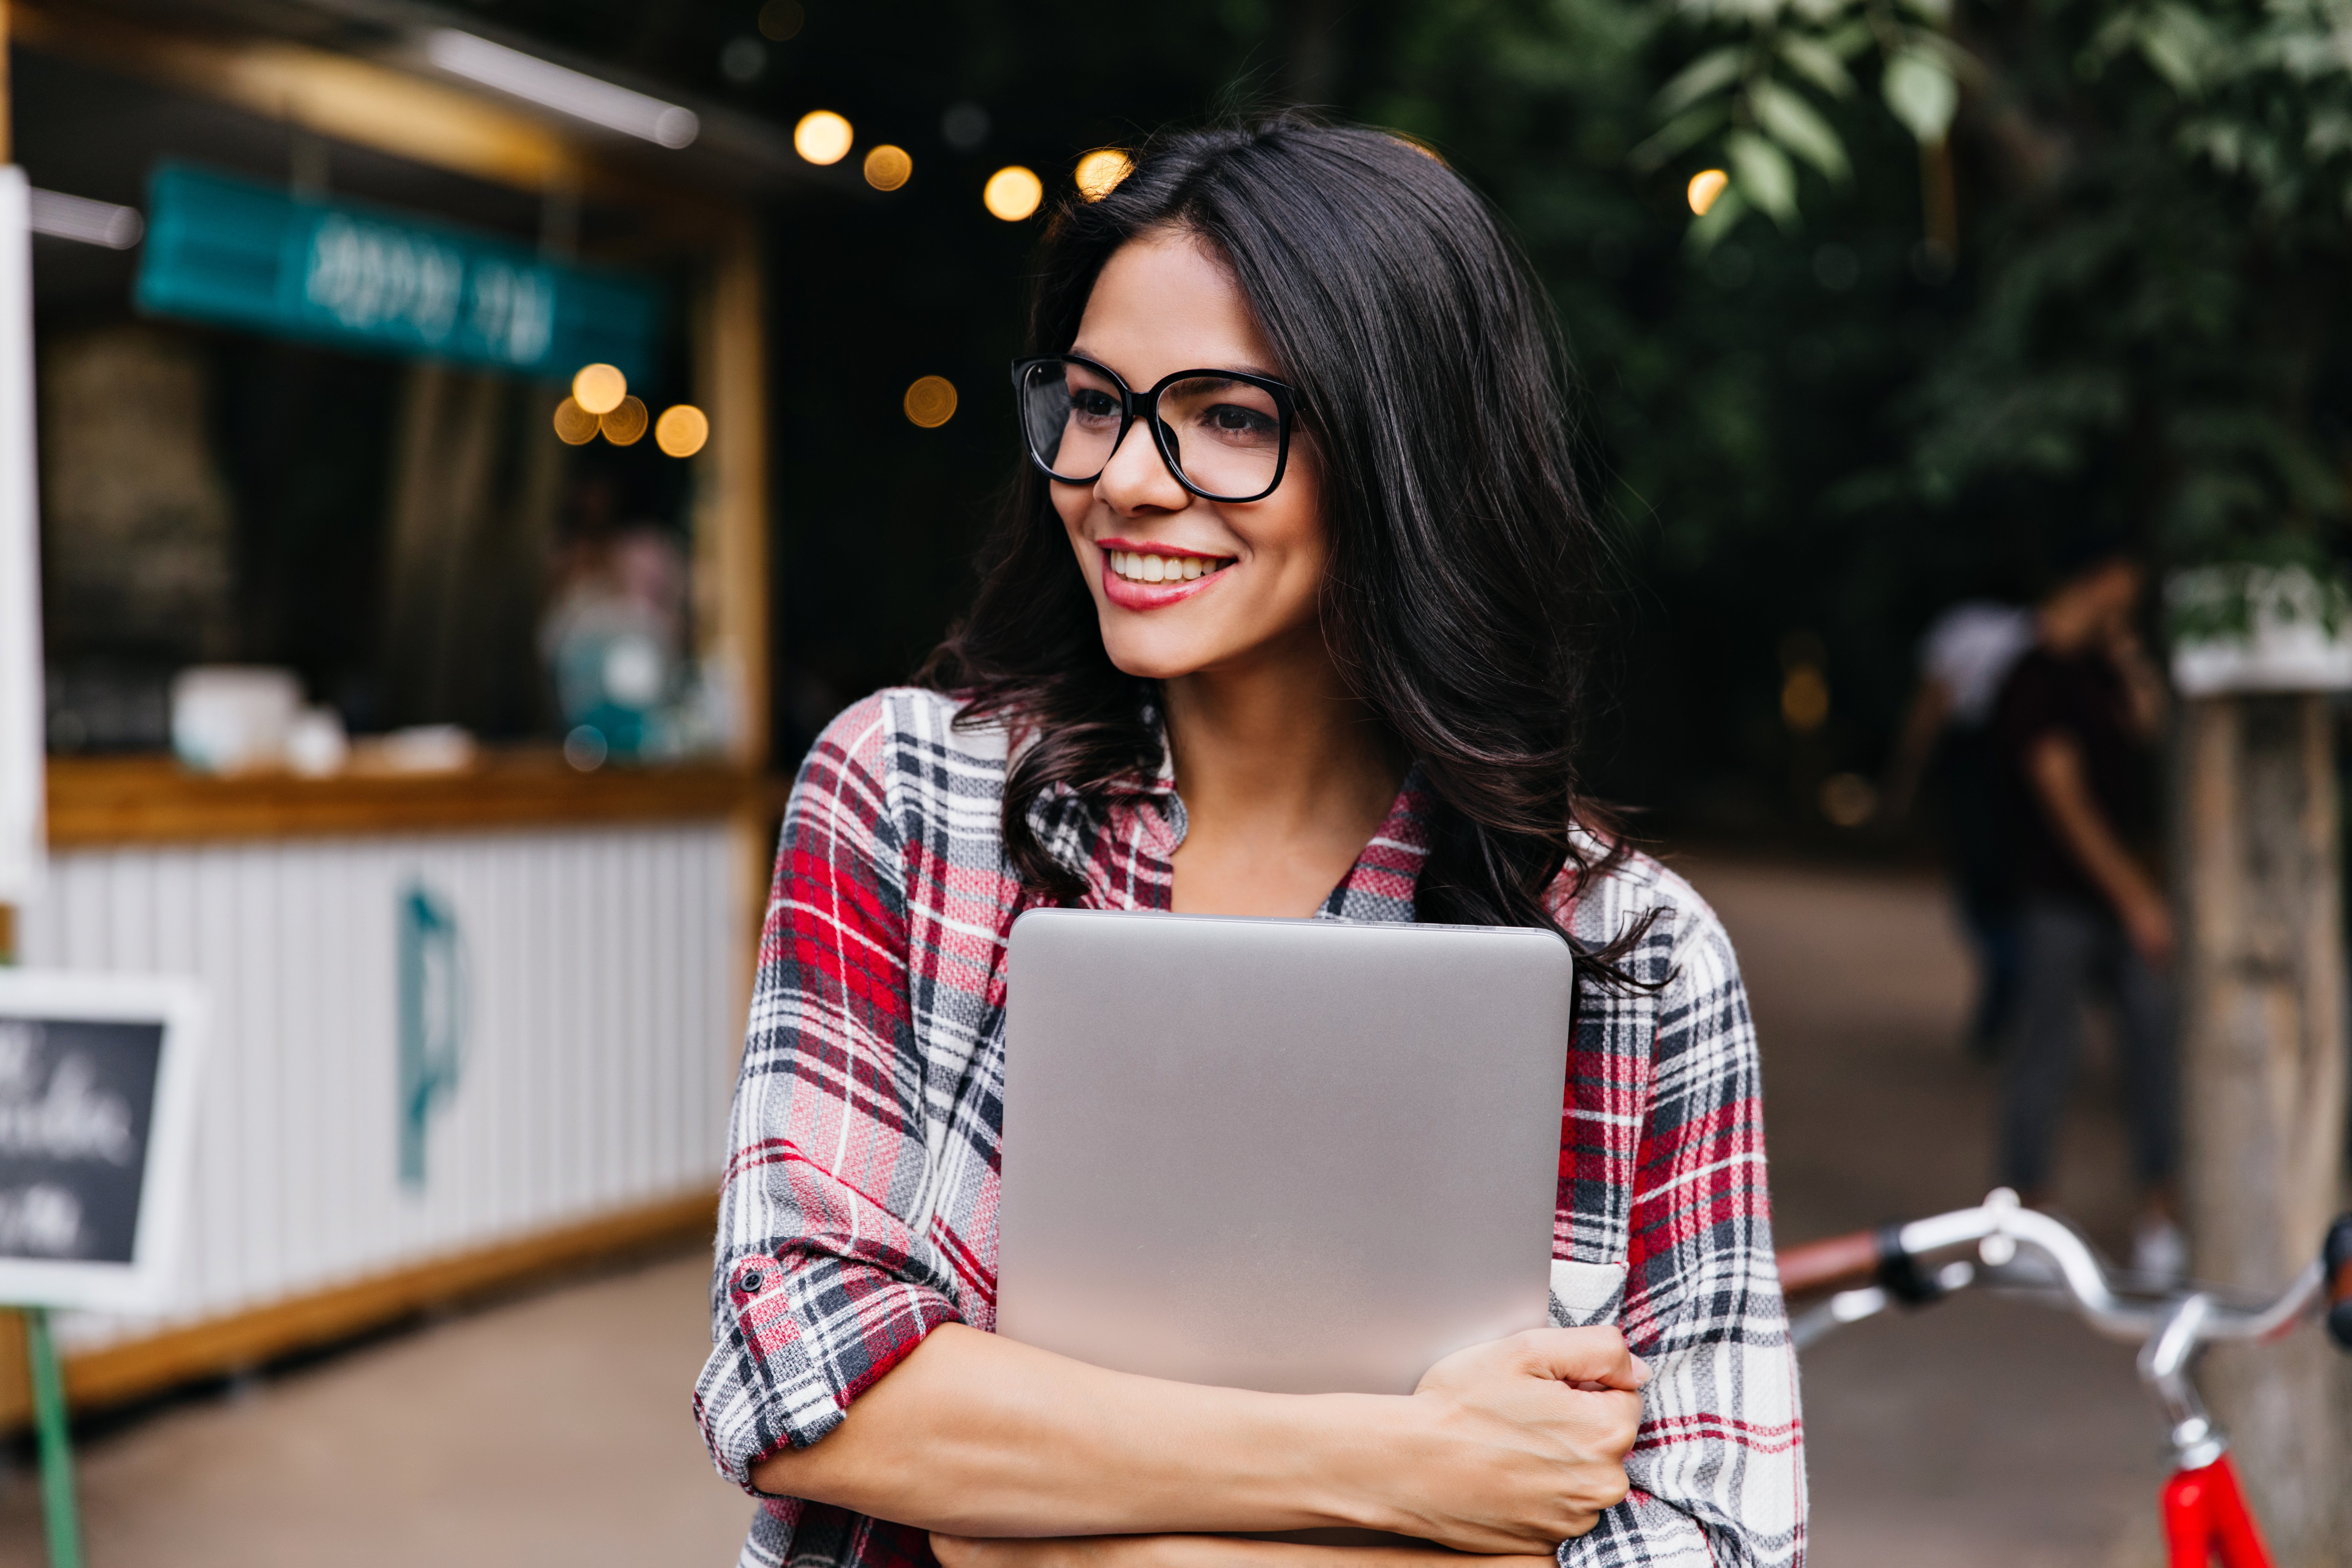 charming-female-student-with-wavy-hair-standing-on-the-street-pretty-tanned-girl-in-checkered-shirt-holding-laptop-and-looking-around